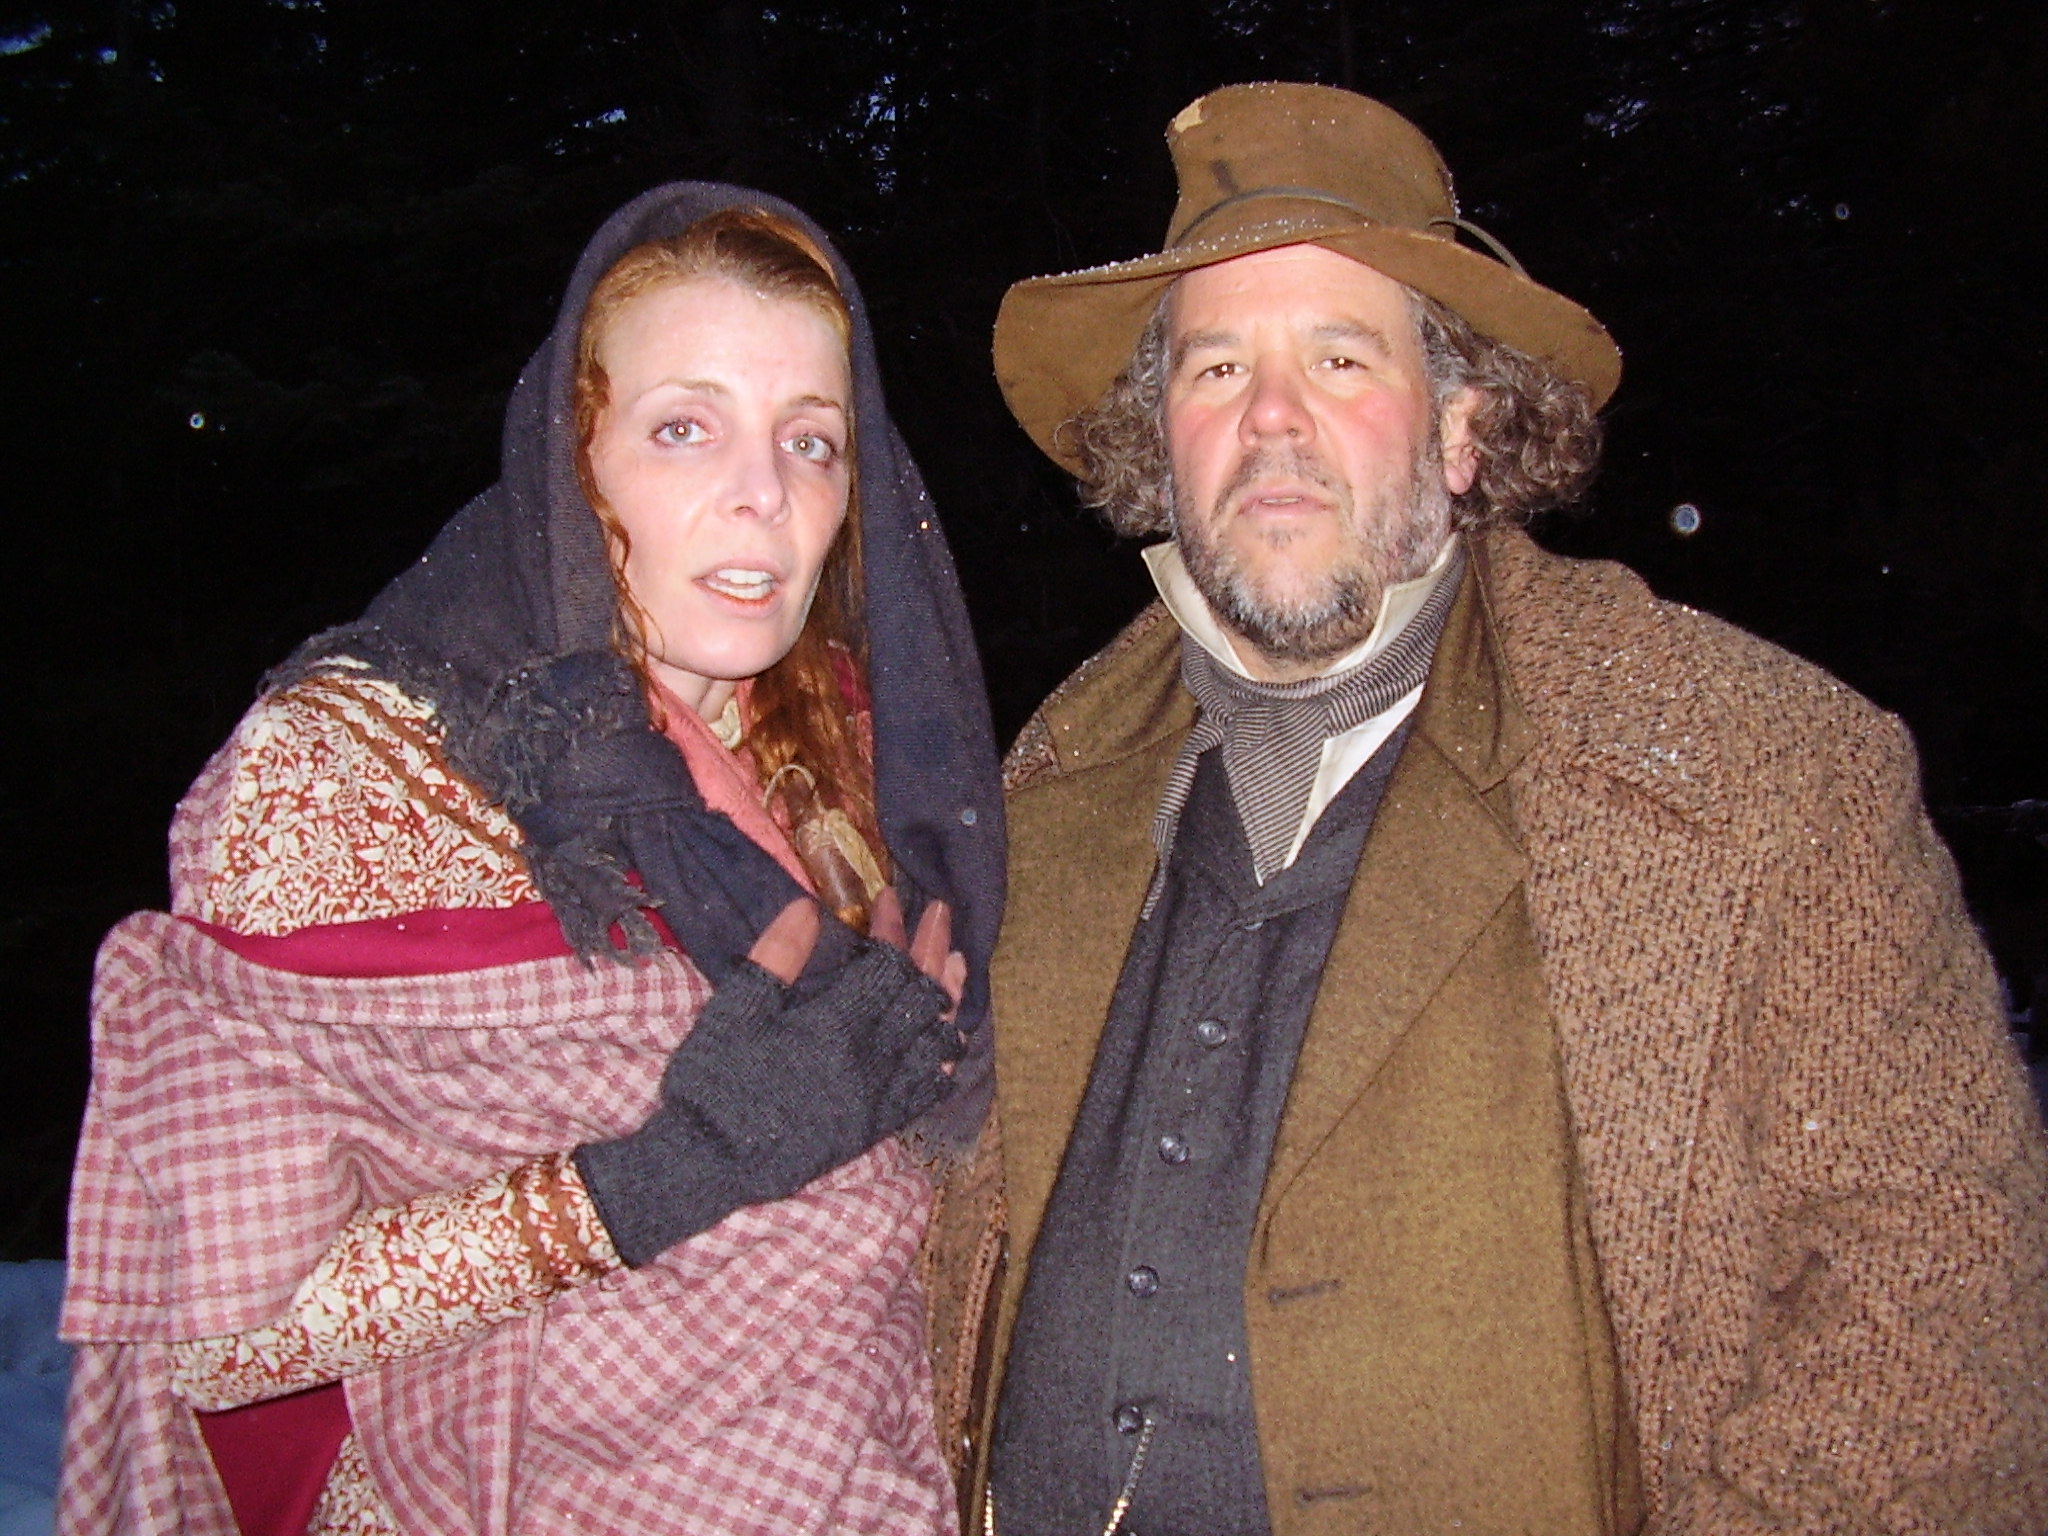 Michele Santopietro and Mark Boone Jr. (Sons of Anarchy, Batman Begins) in THE DONNER PARTY